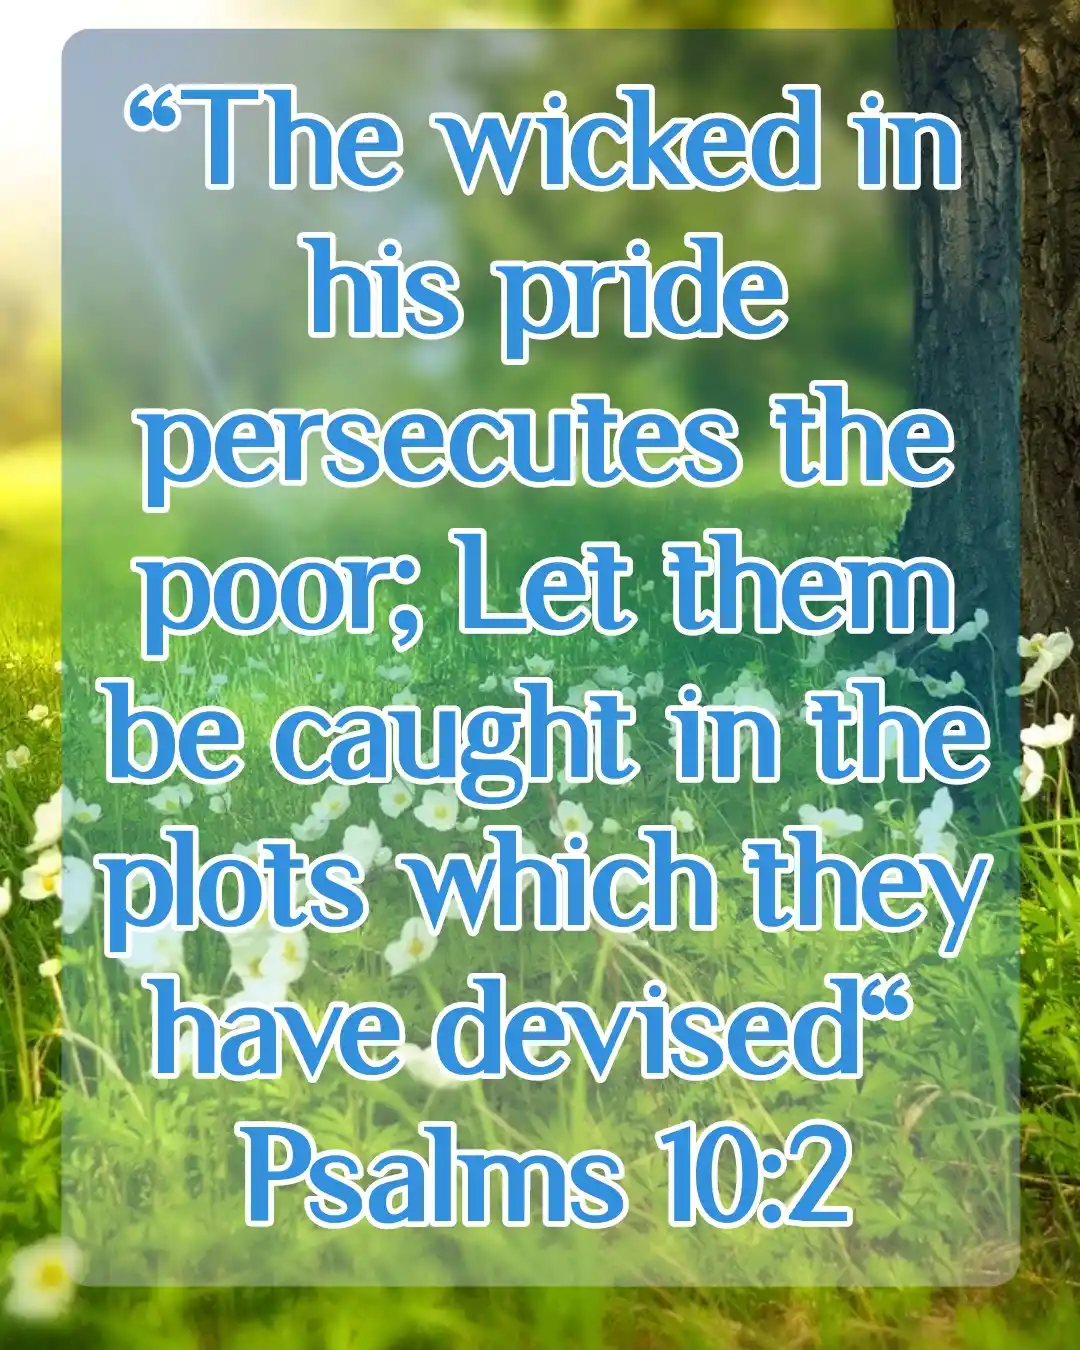 today bible verse (Psalm 10:2)